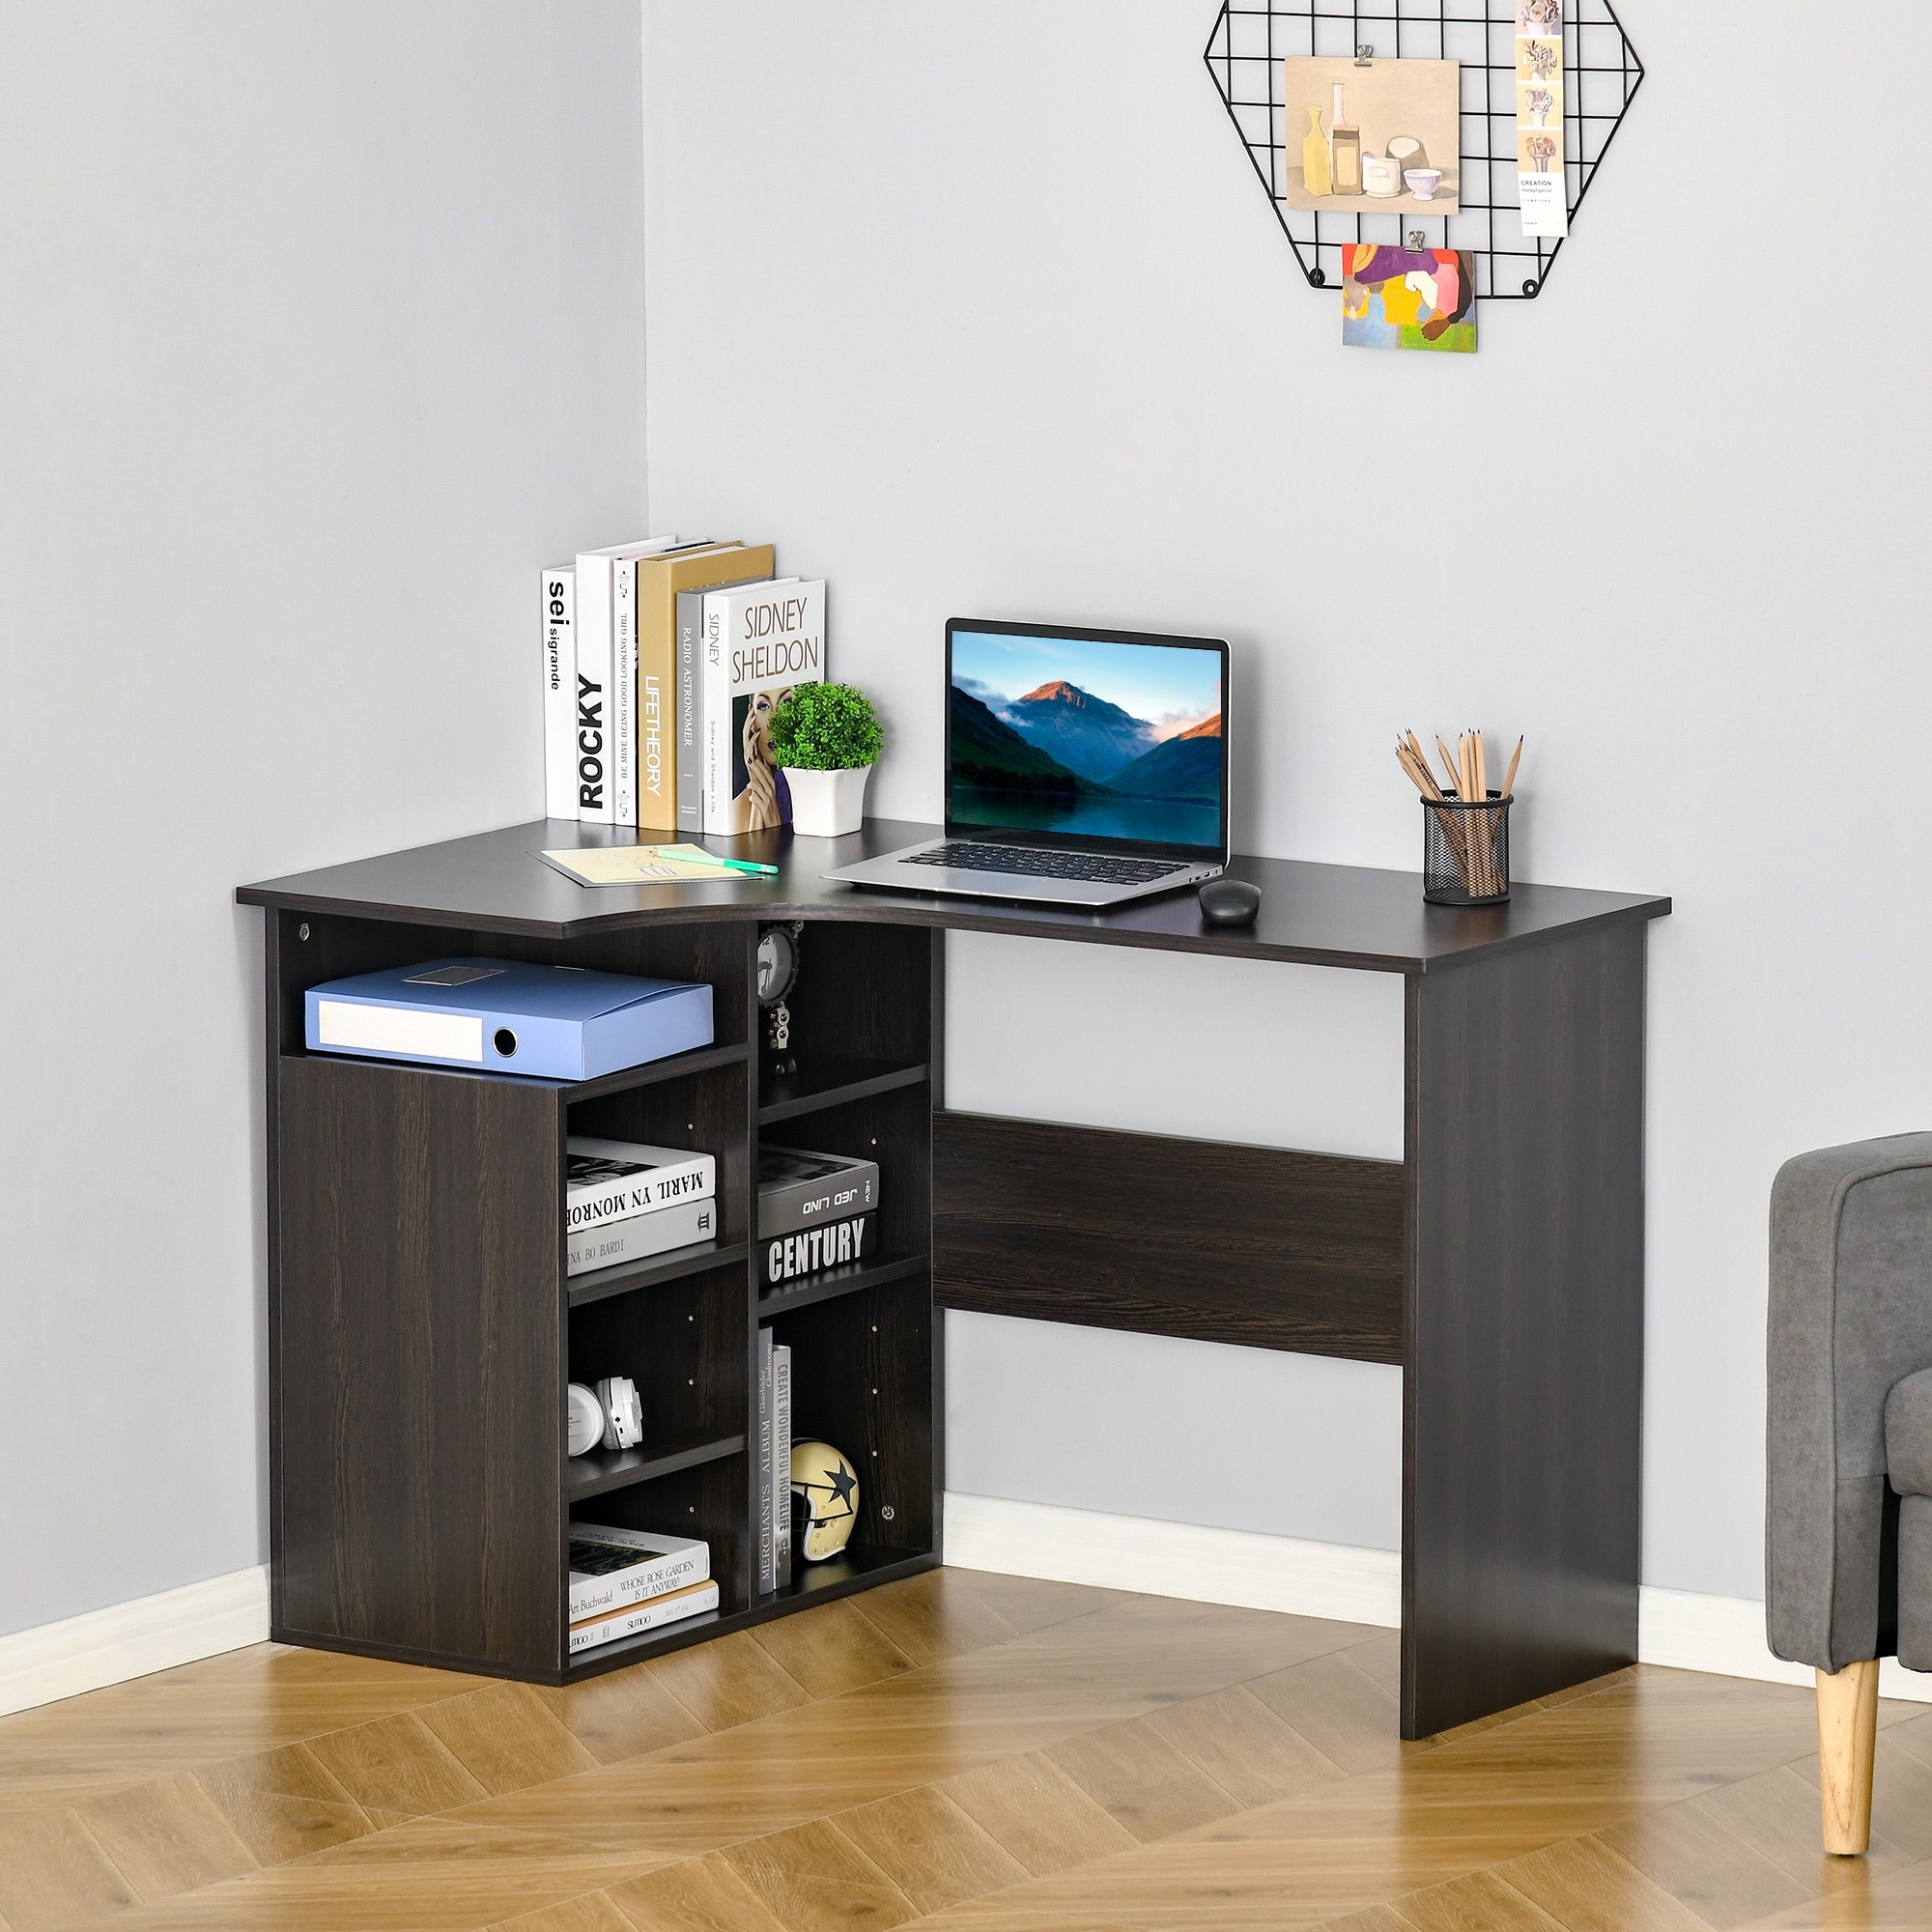 Corner Desks with Drawers White gloss or Oak L Shaped Computer Study Tables 